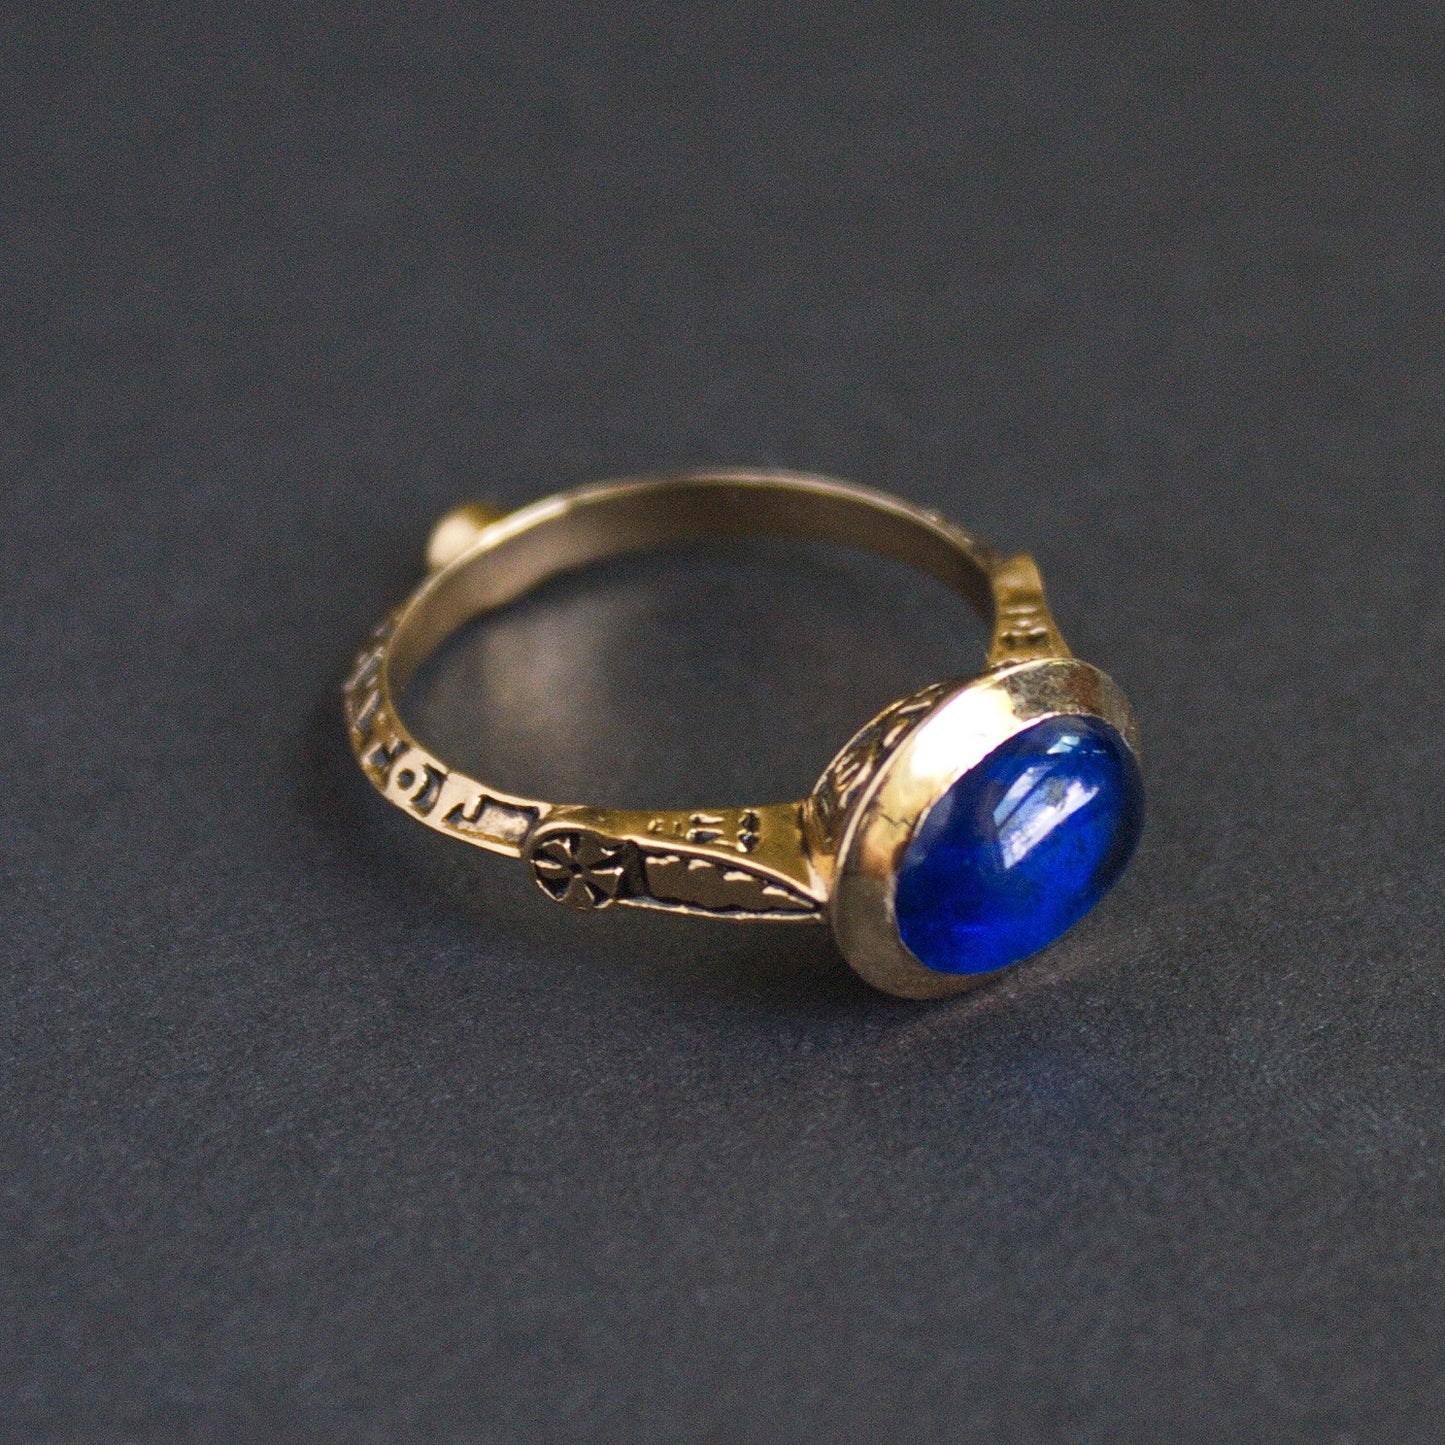 14th Century British Ring from the City of York